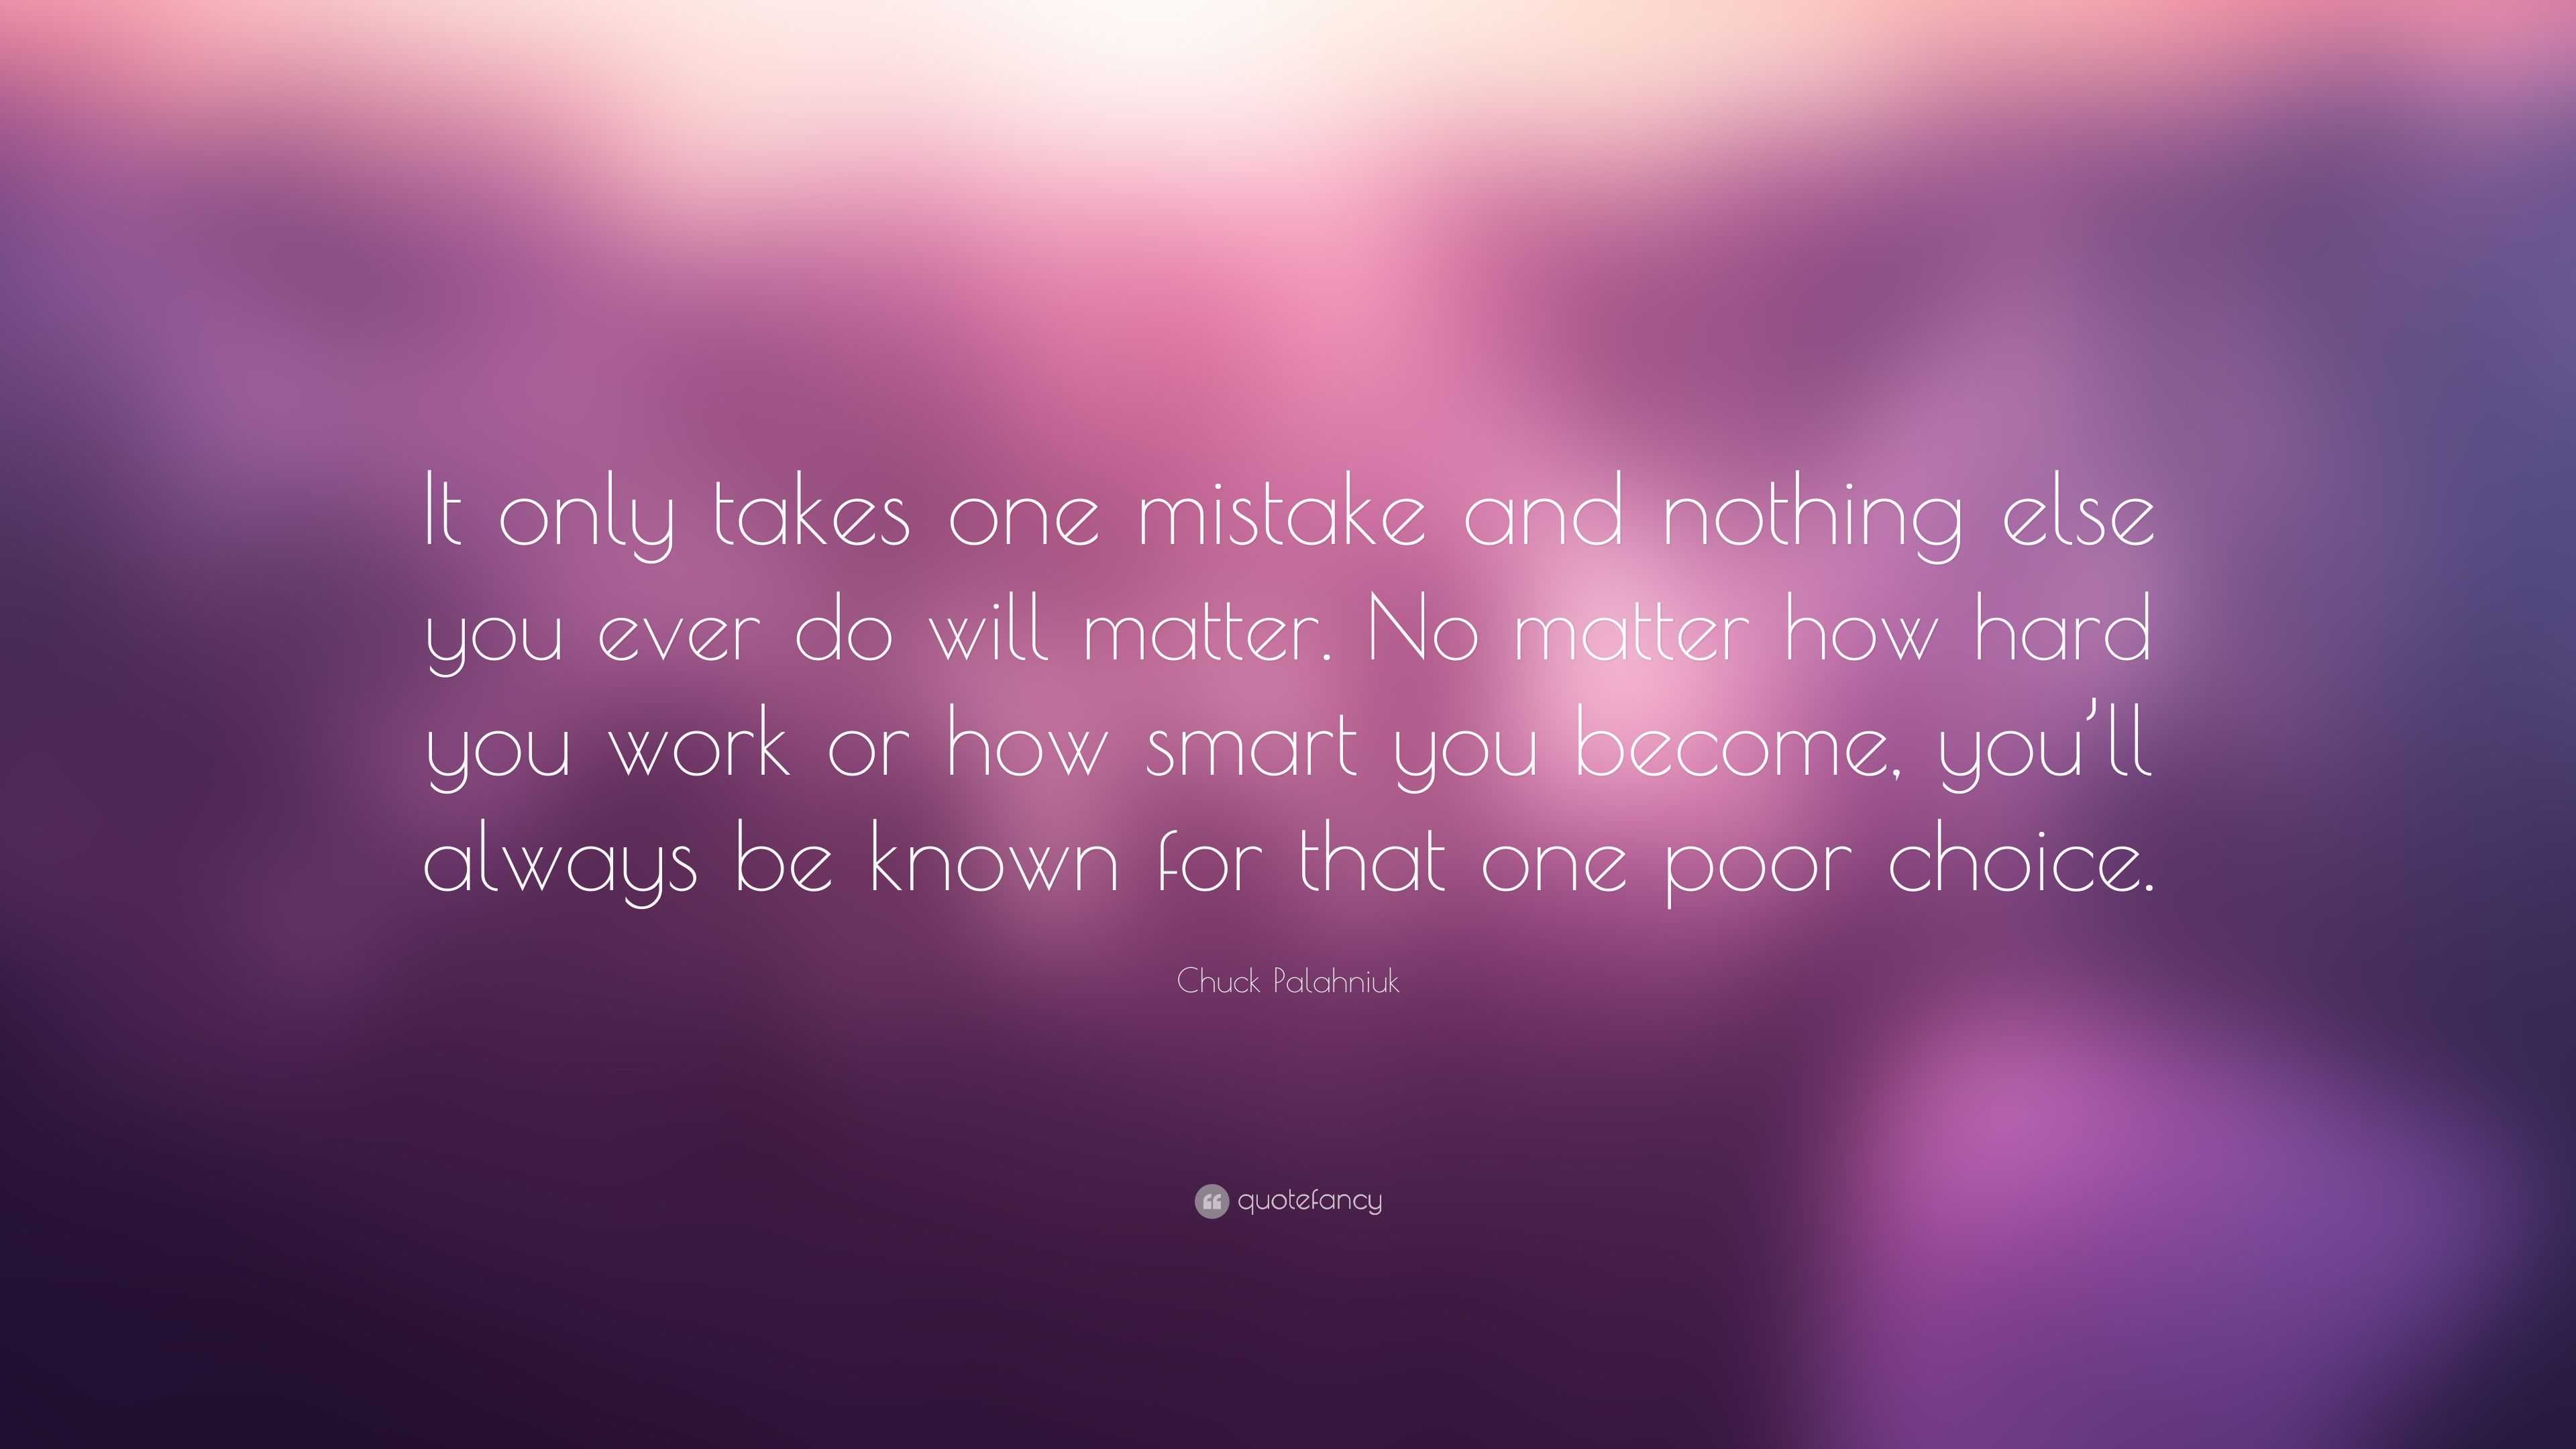 Chuck Palahniuk Quote: “It only takes one mistake and nothing else you ...